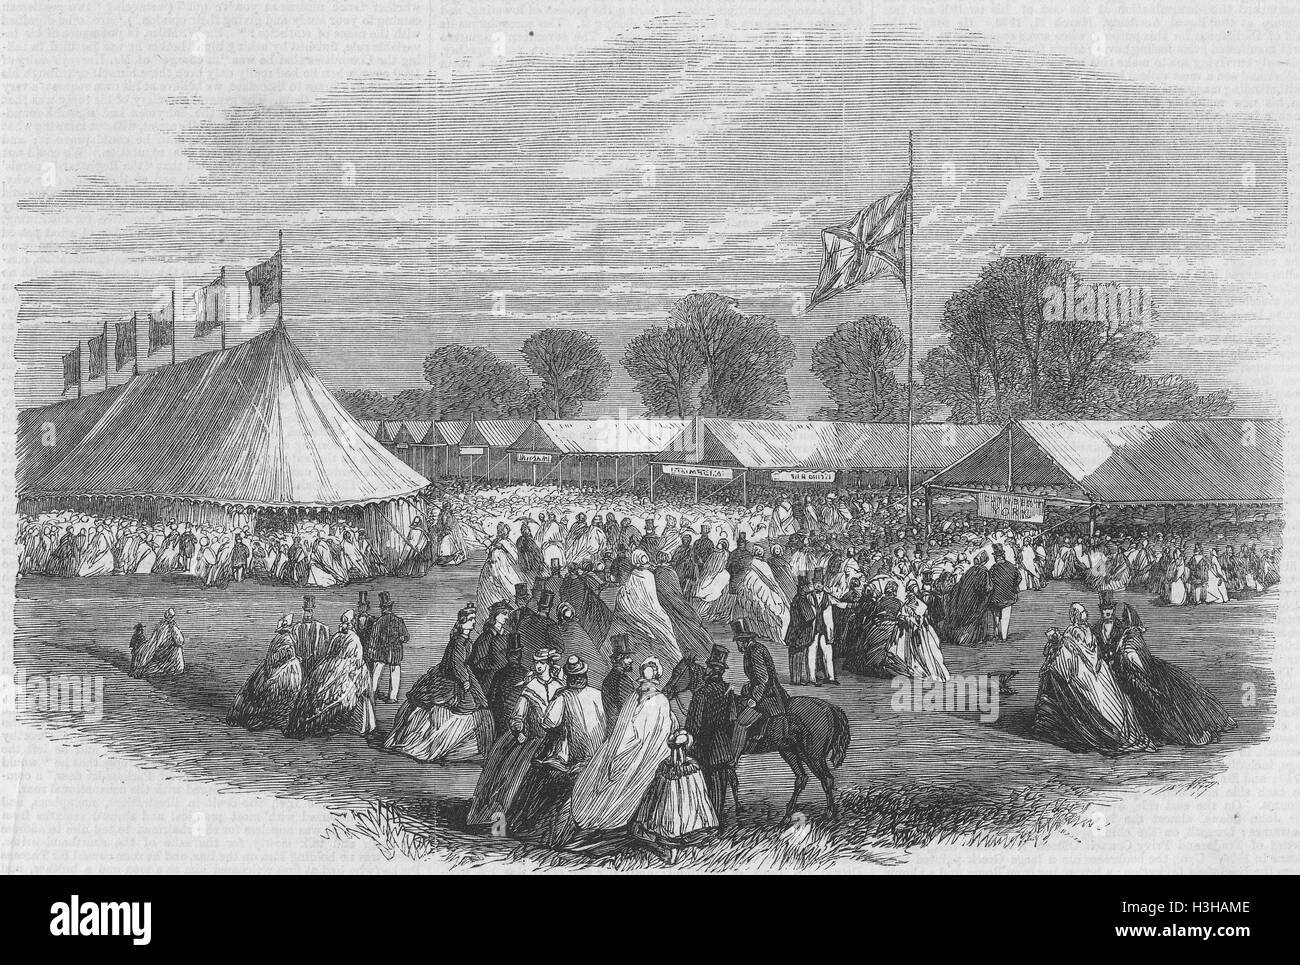 SOMT Inghilterra Occidentale Società Agricola, Clifton 1864. Illustrated London News Foto Stock